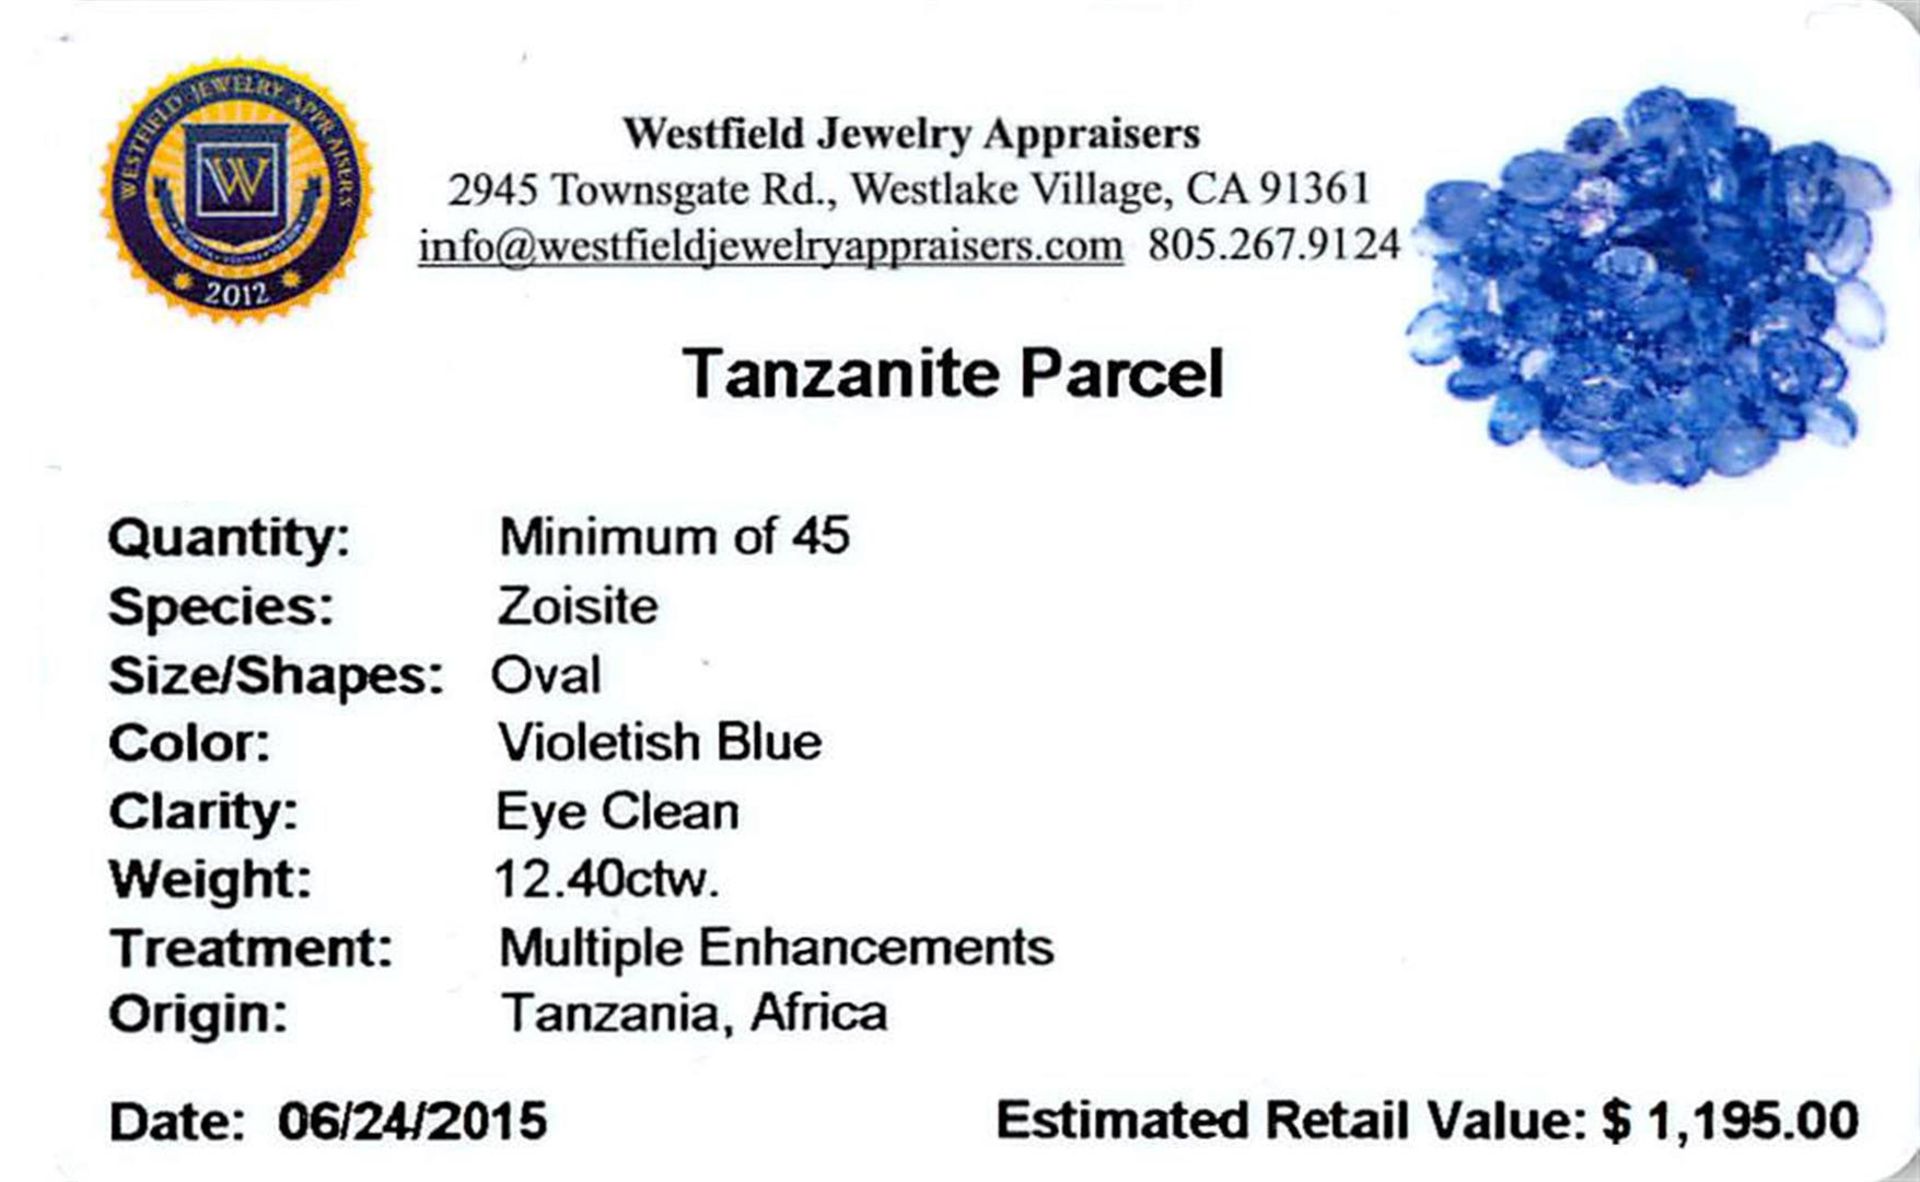 12.4ctw Oval Mixed Tanzanite Parcel - Image 2 of 2